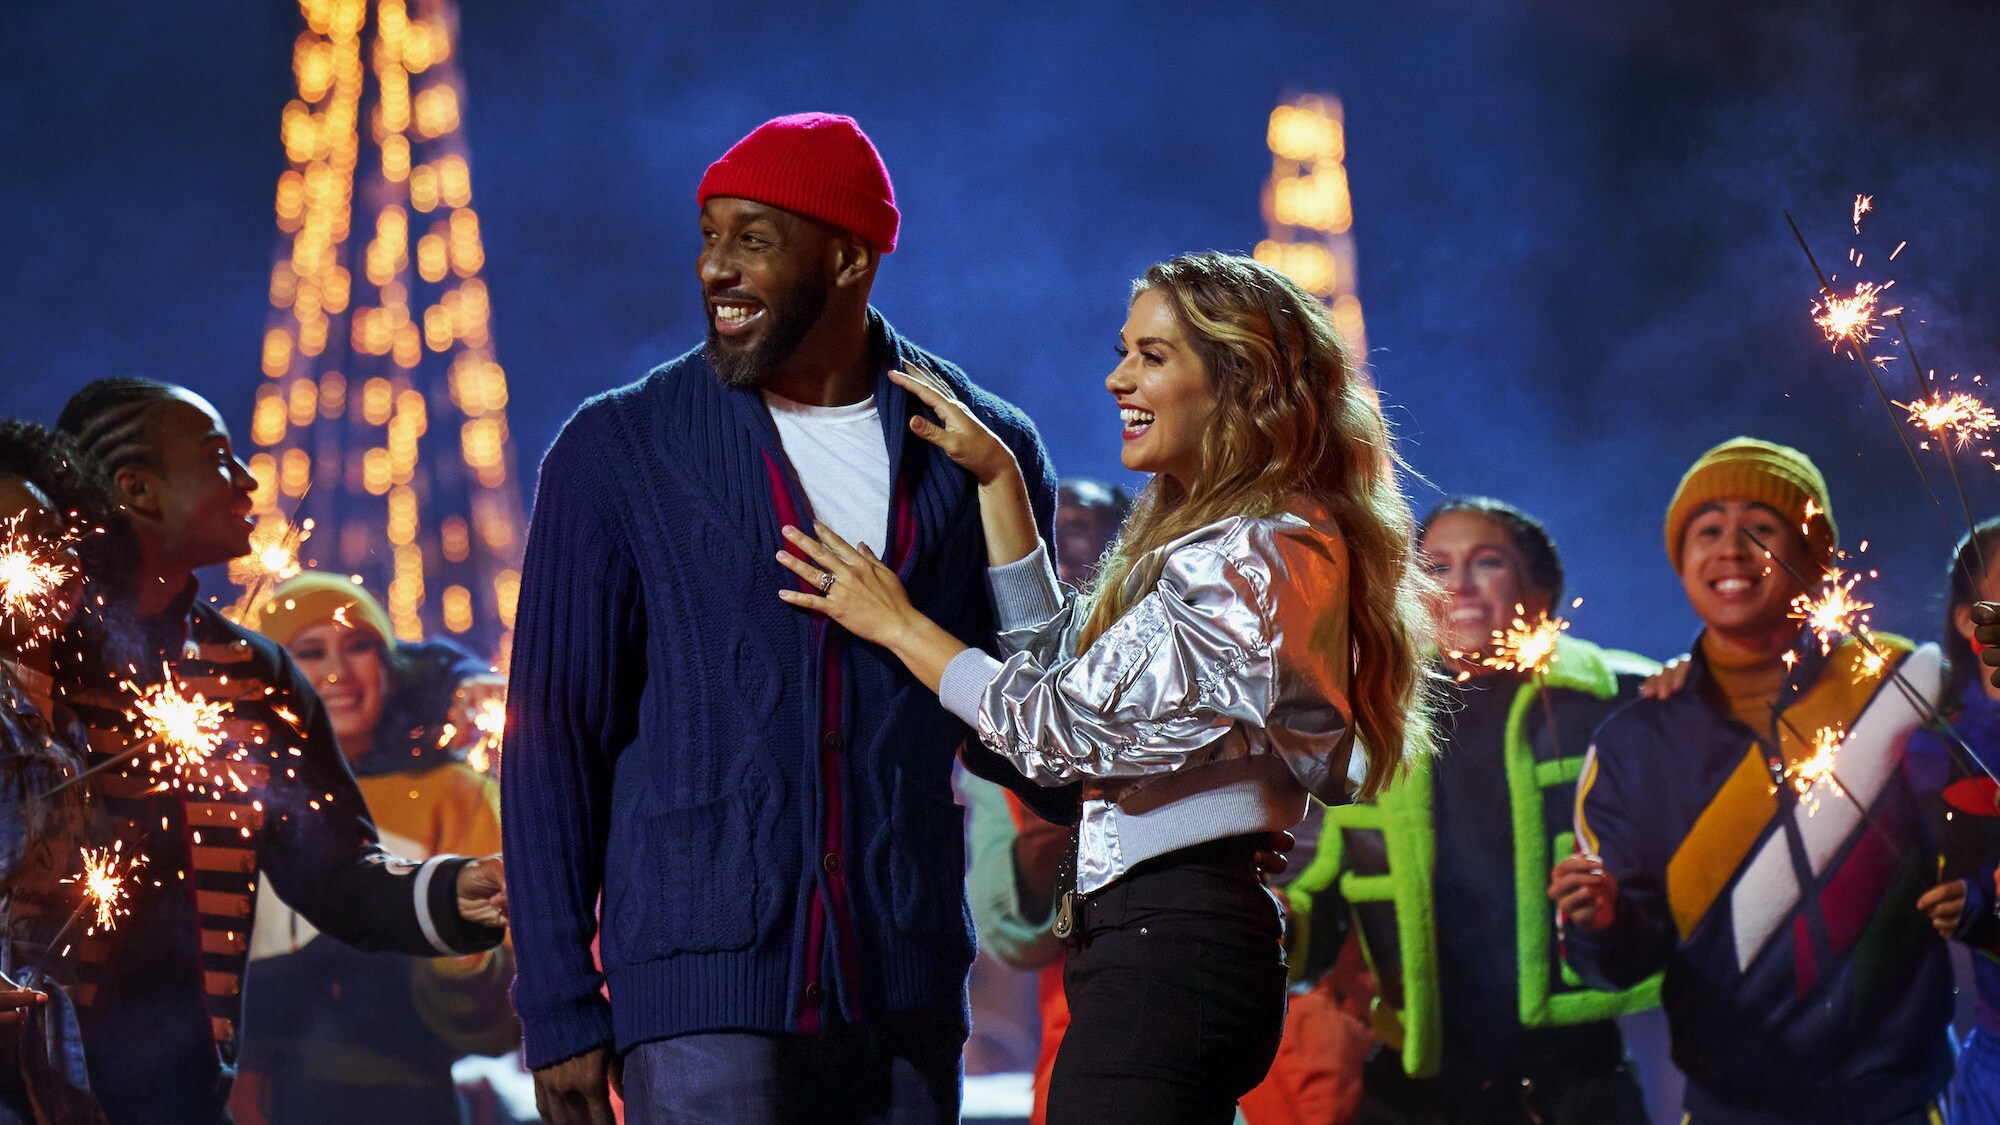 Dad, played by Stephen "tWitch" Boss, and Mom, played by Allison Holker Boss, in Disney's The Hip Hop Nutcracker. (Photo credit: Disney/Ser Baffo)